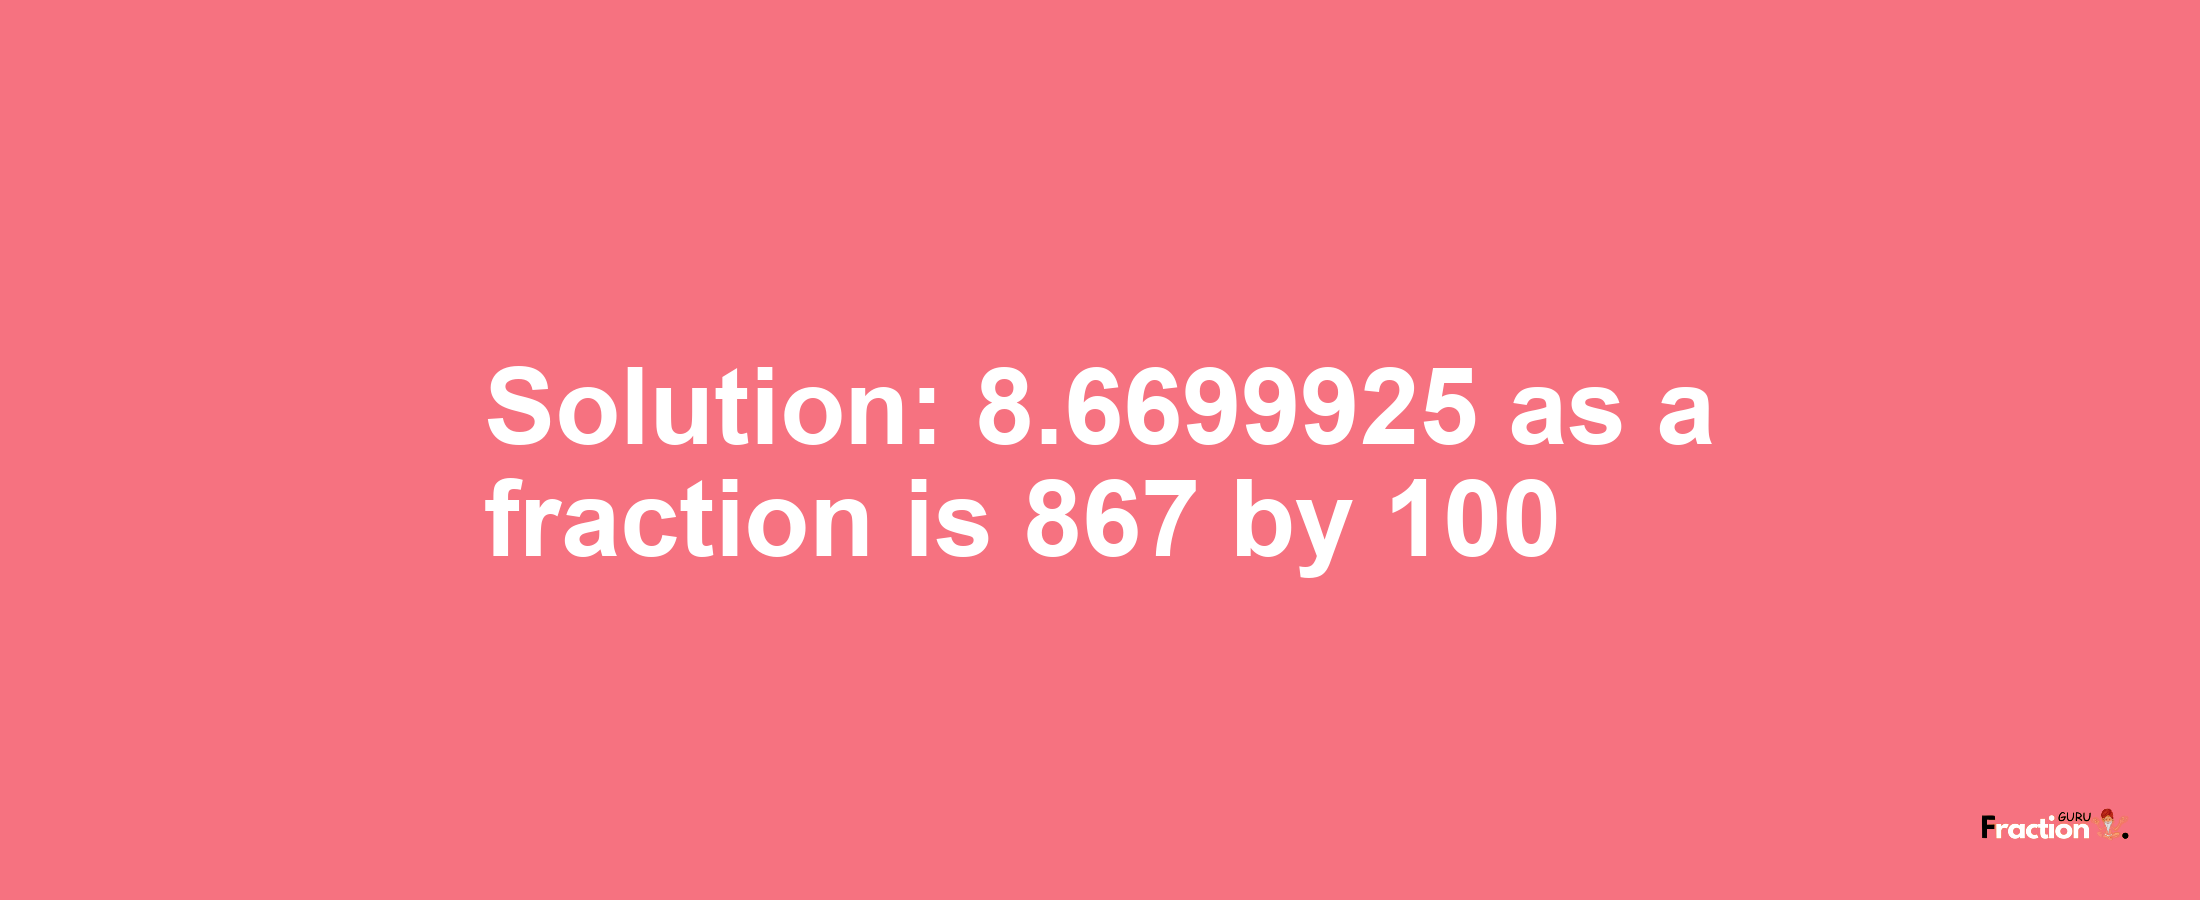 Solution:8.6699925 as a fraction is 867/100